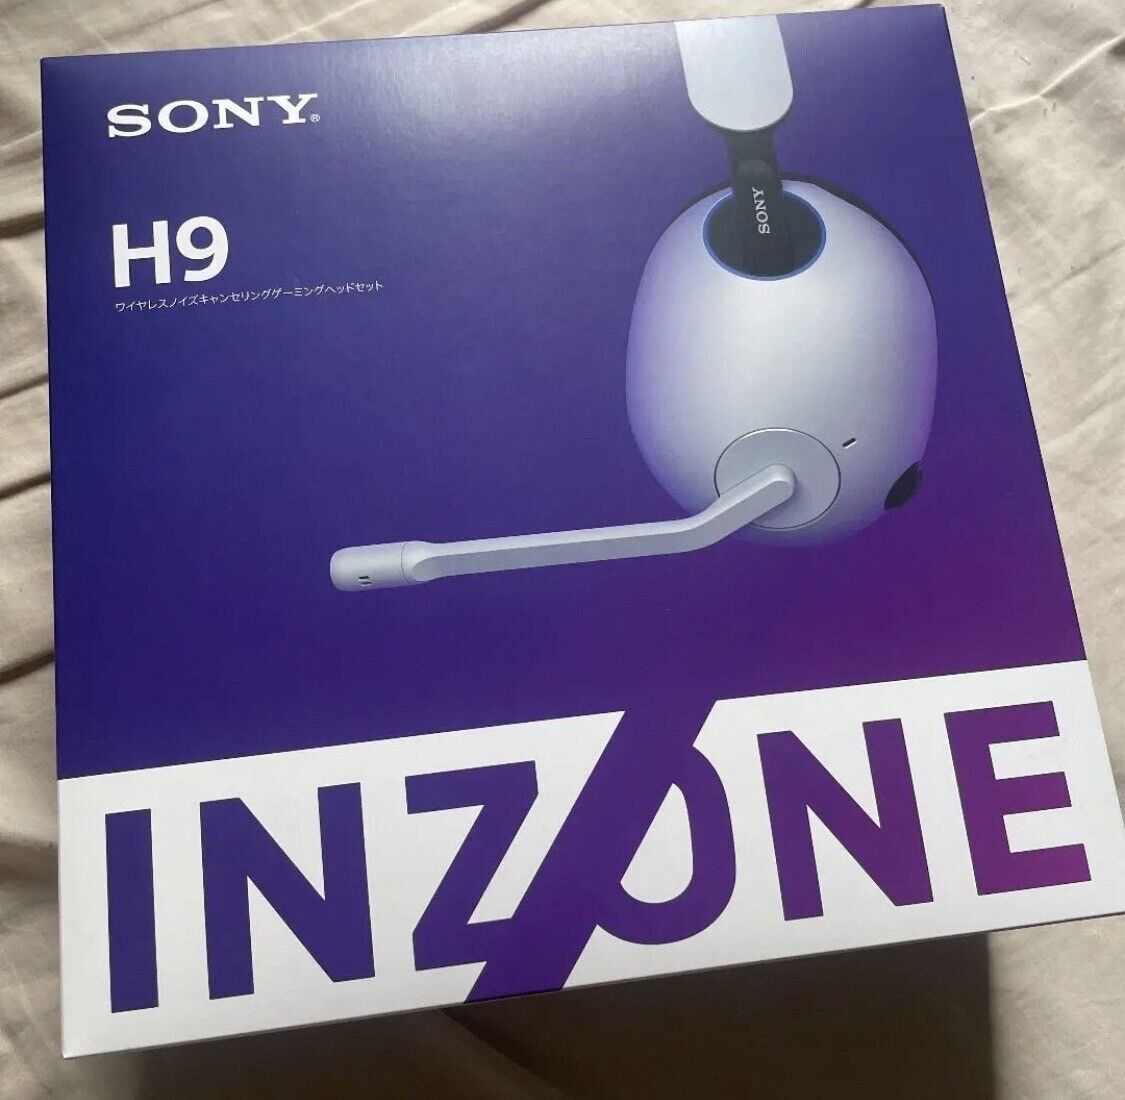 H9 SONY INZONE Gaming Headset WH-G900N-WZ Wireless Model Noise Canceling New